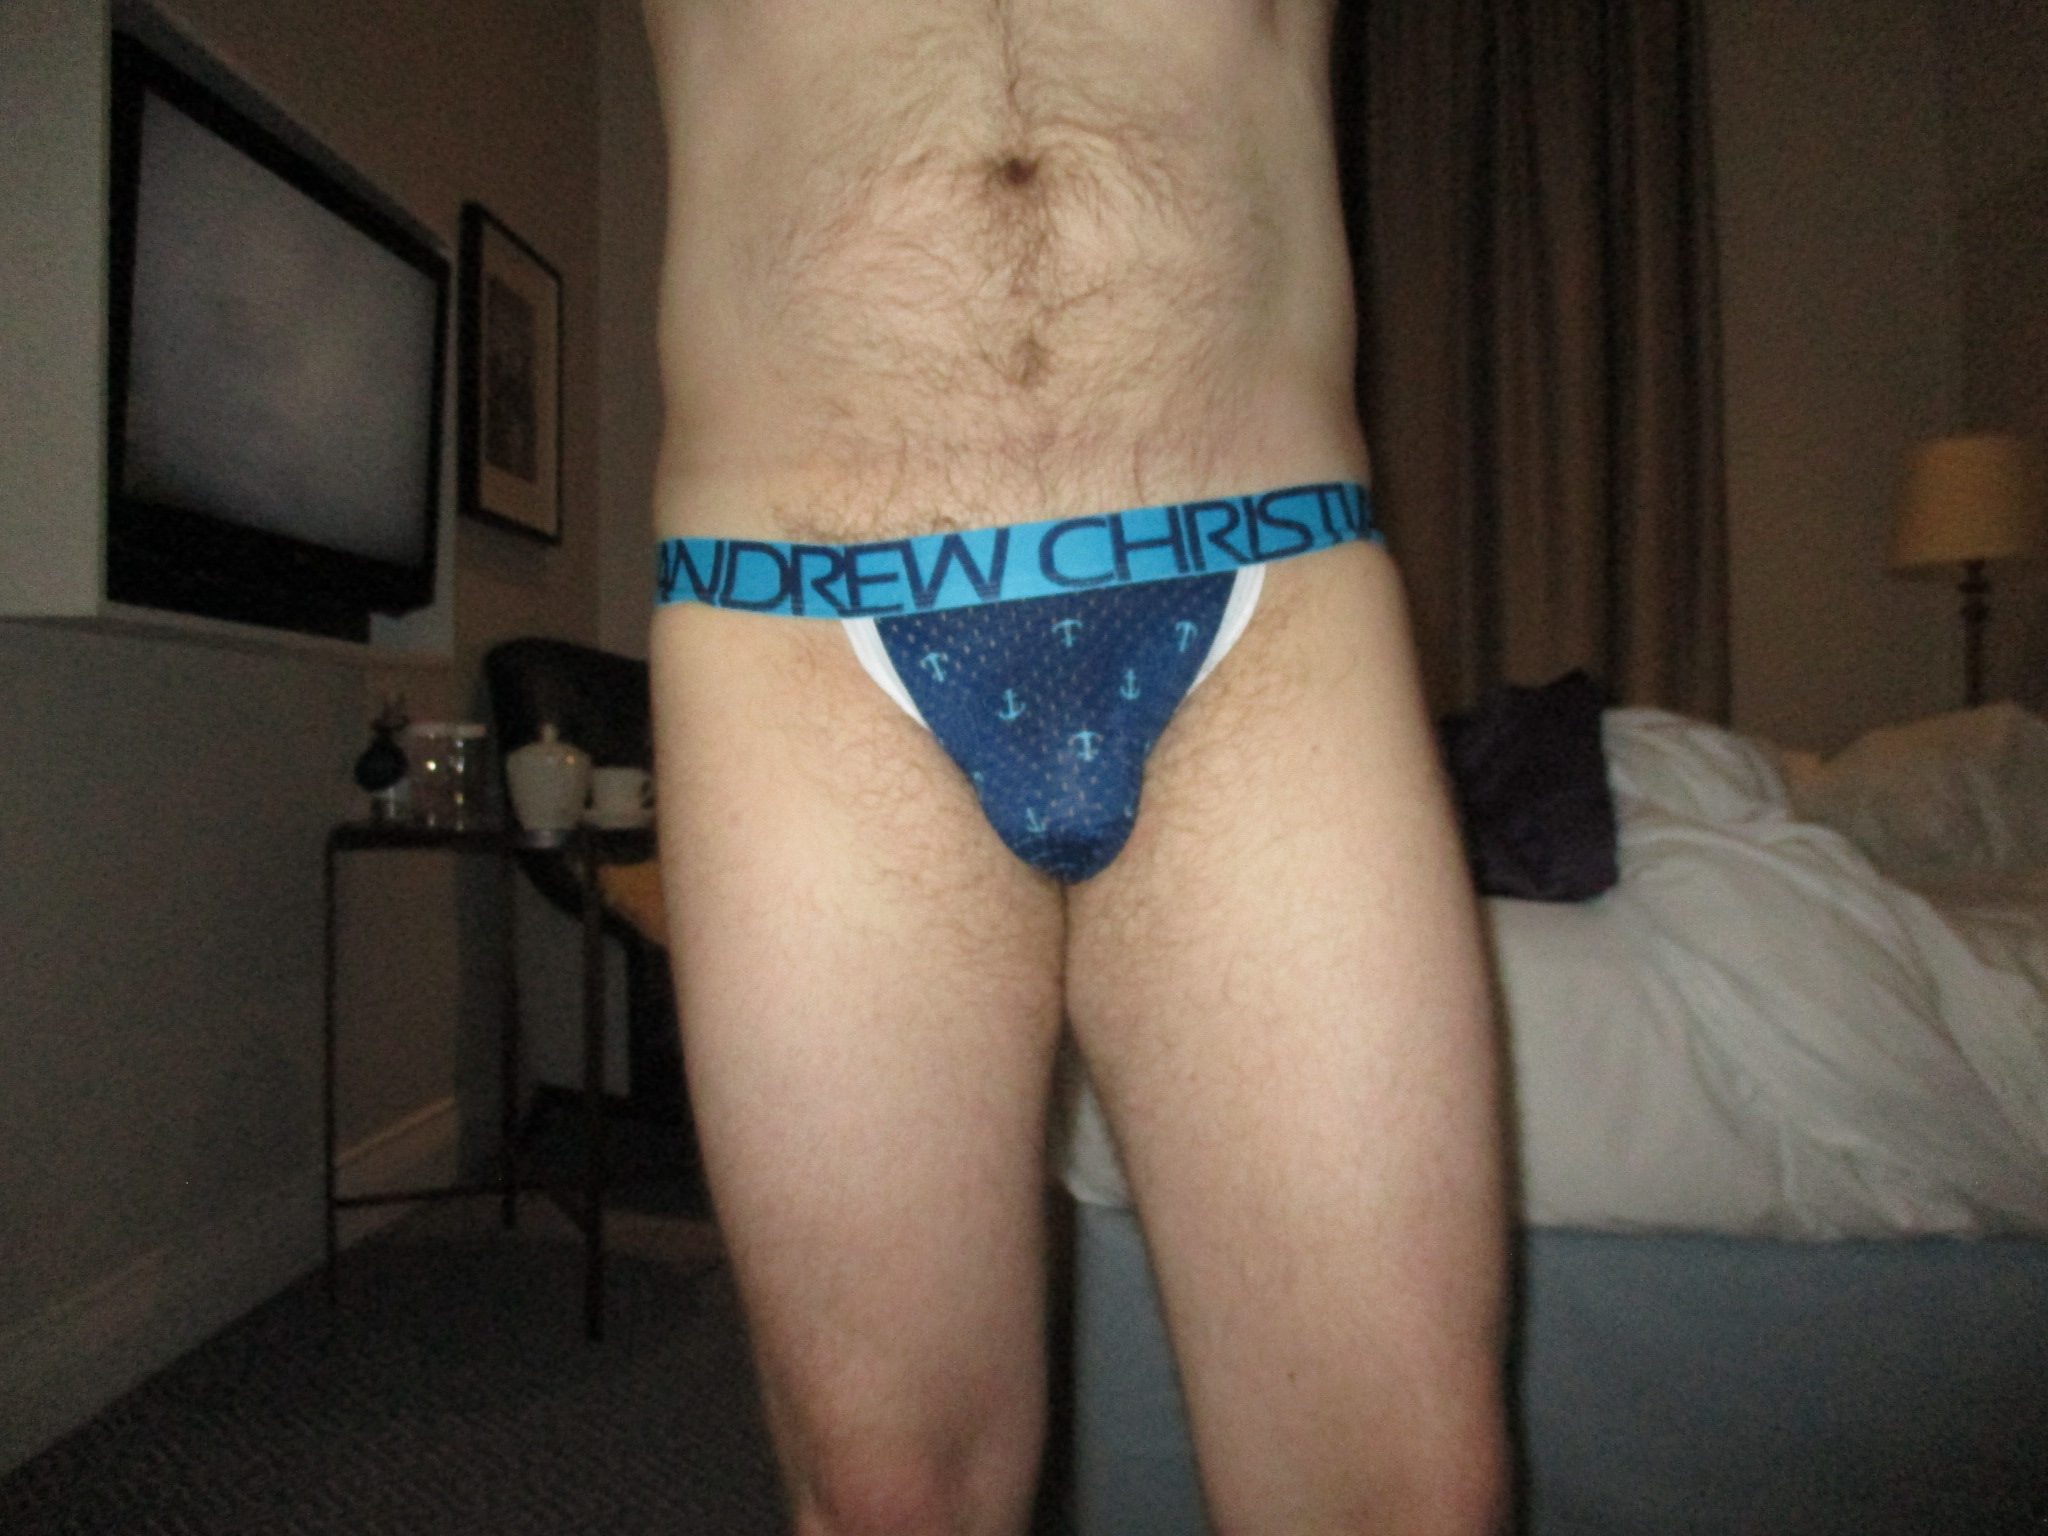 Anchors Away…in a nautical themed jock…